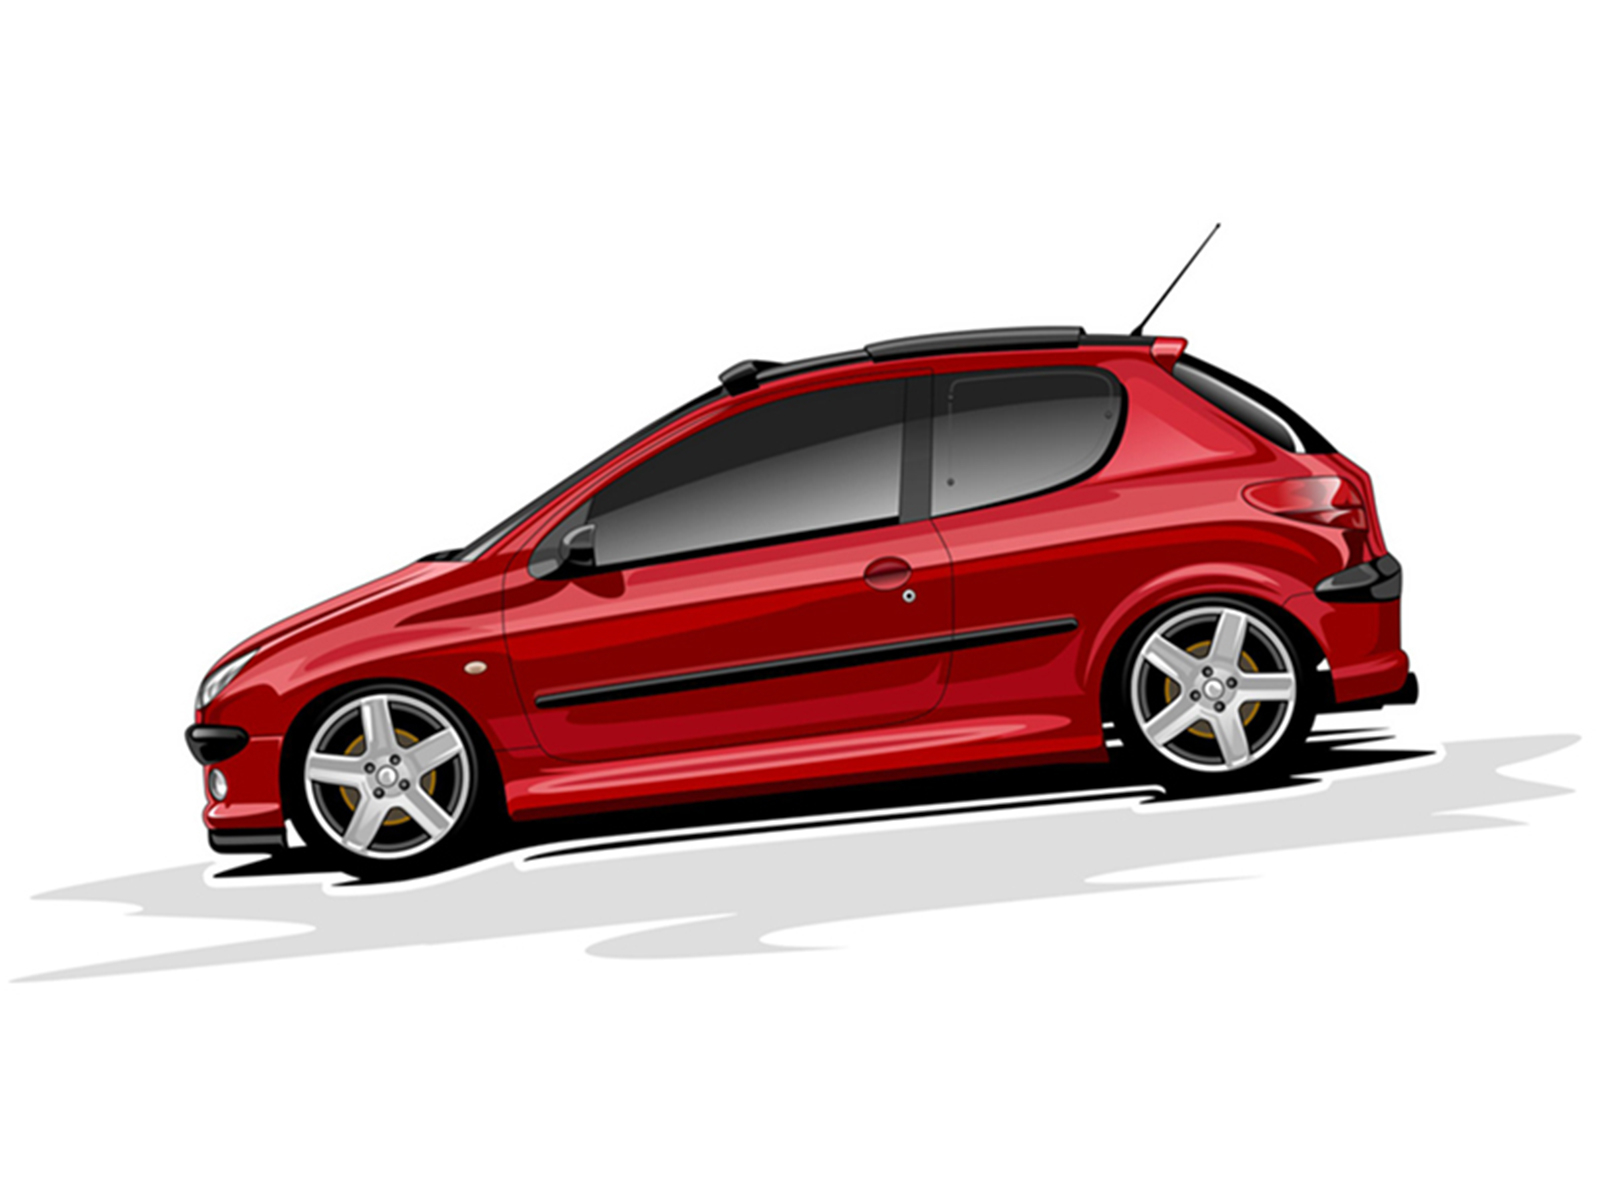 HD peugeot 206 tuning wallpapers